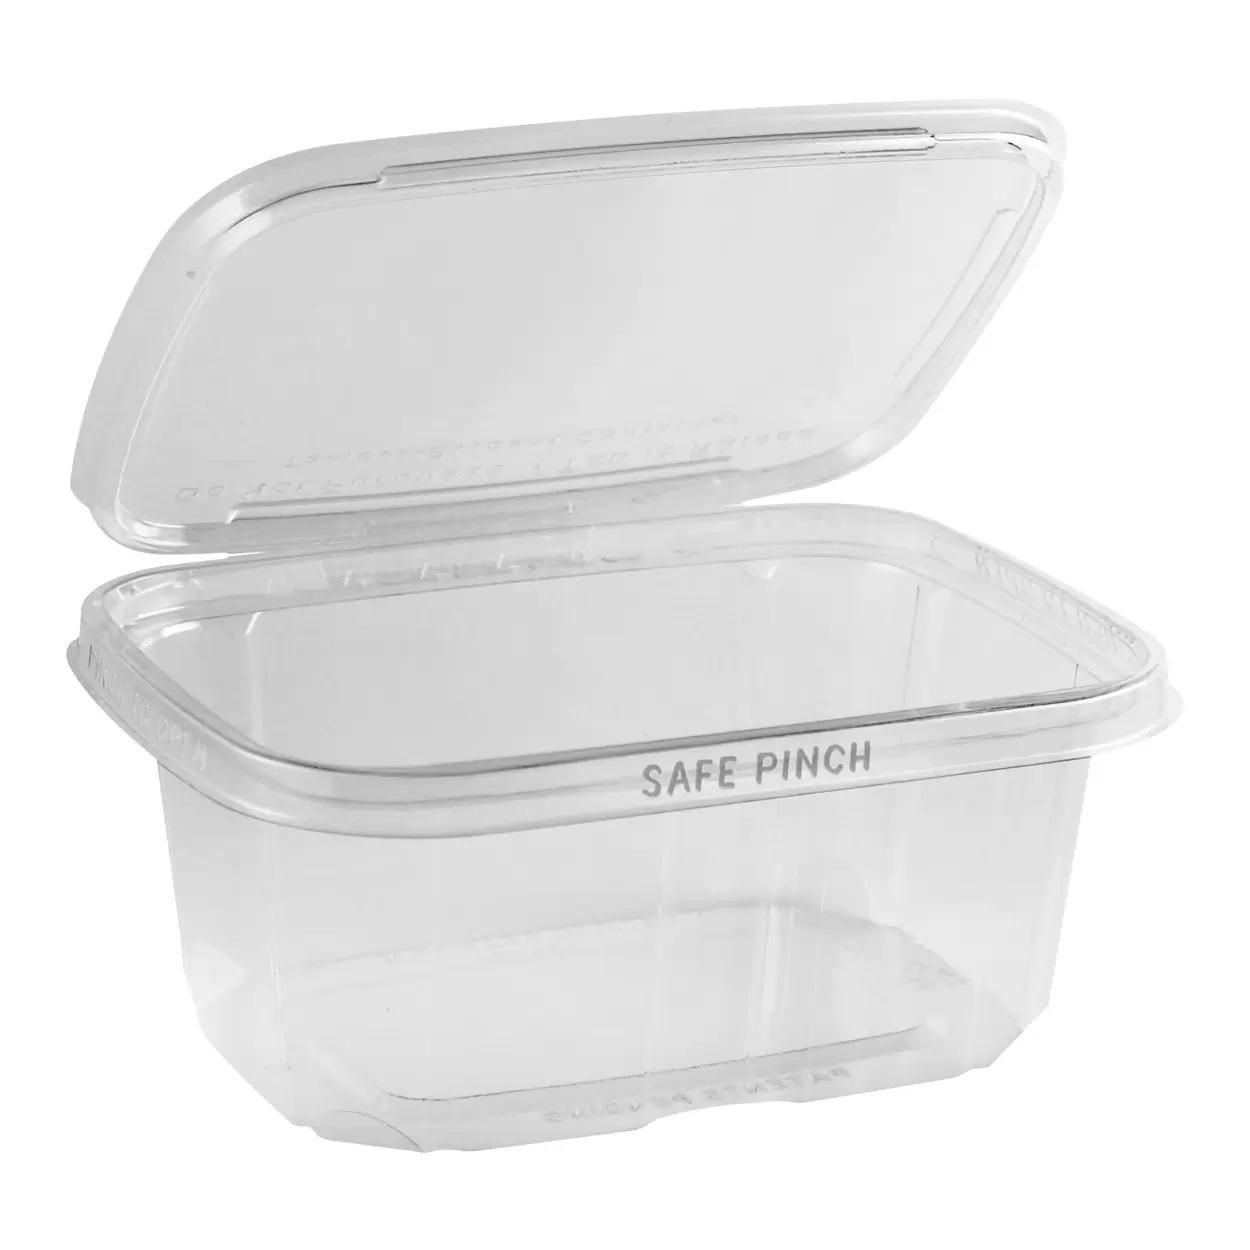 12 oz RPET Clear Clamshell Deli Container | 200/Case